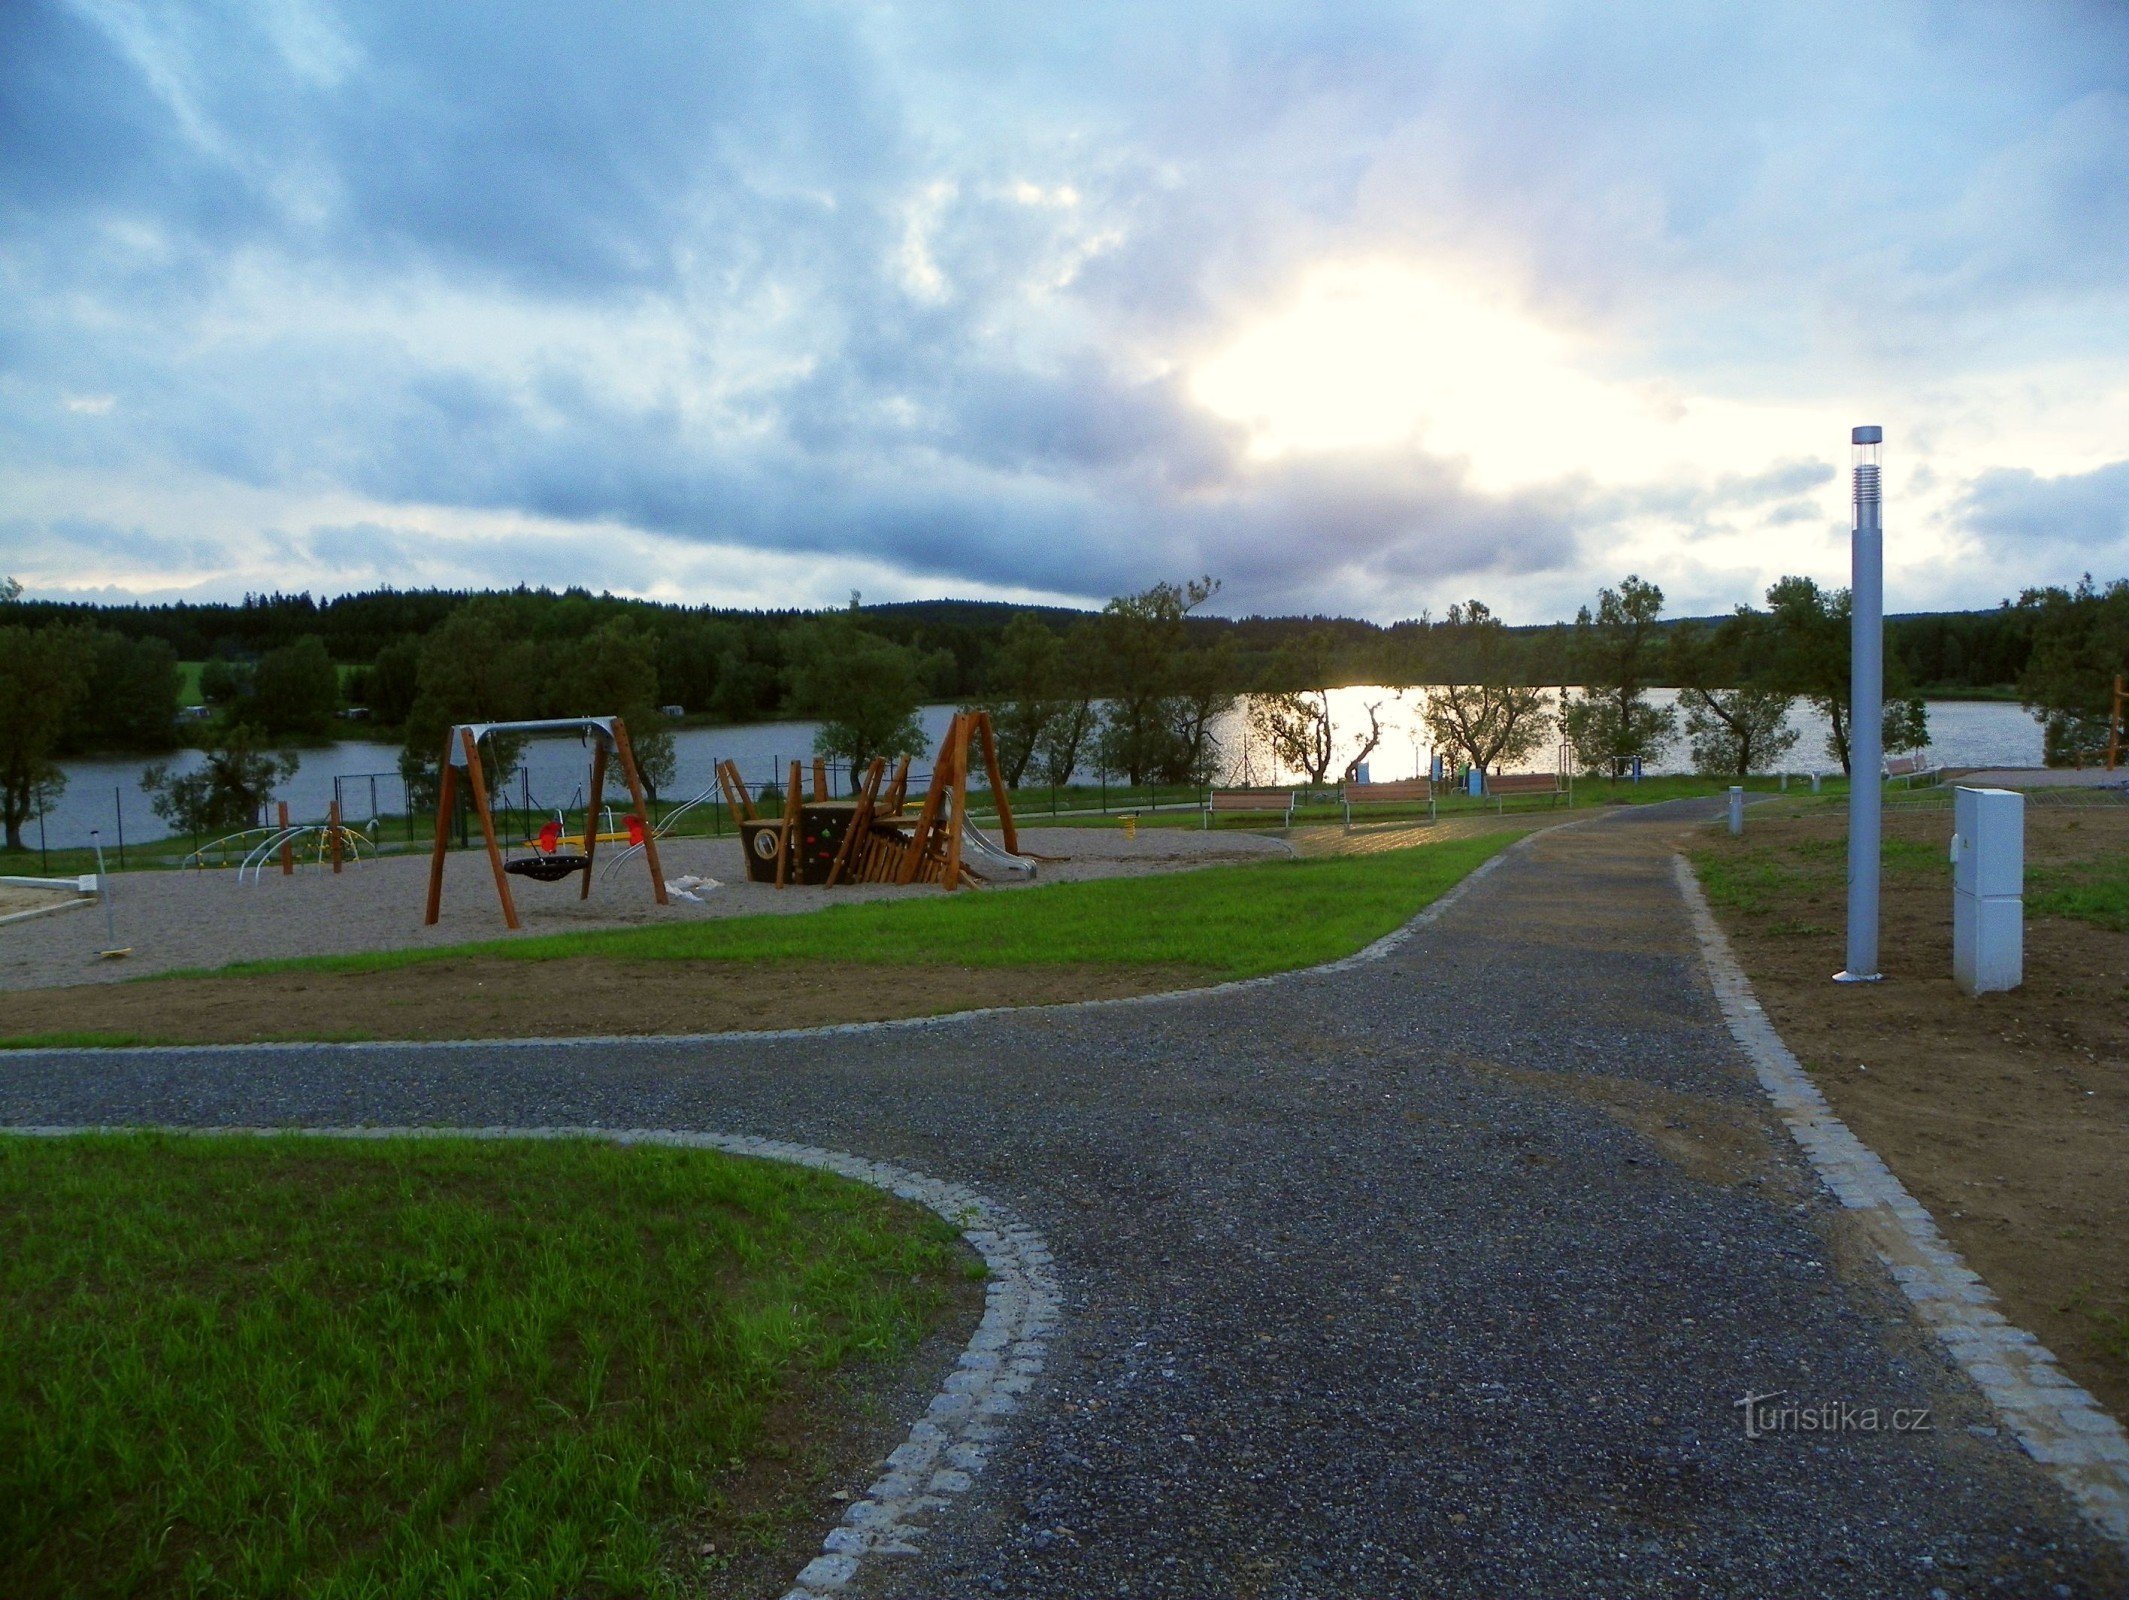 Area near Pilák for leisure and sports